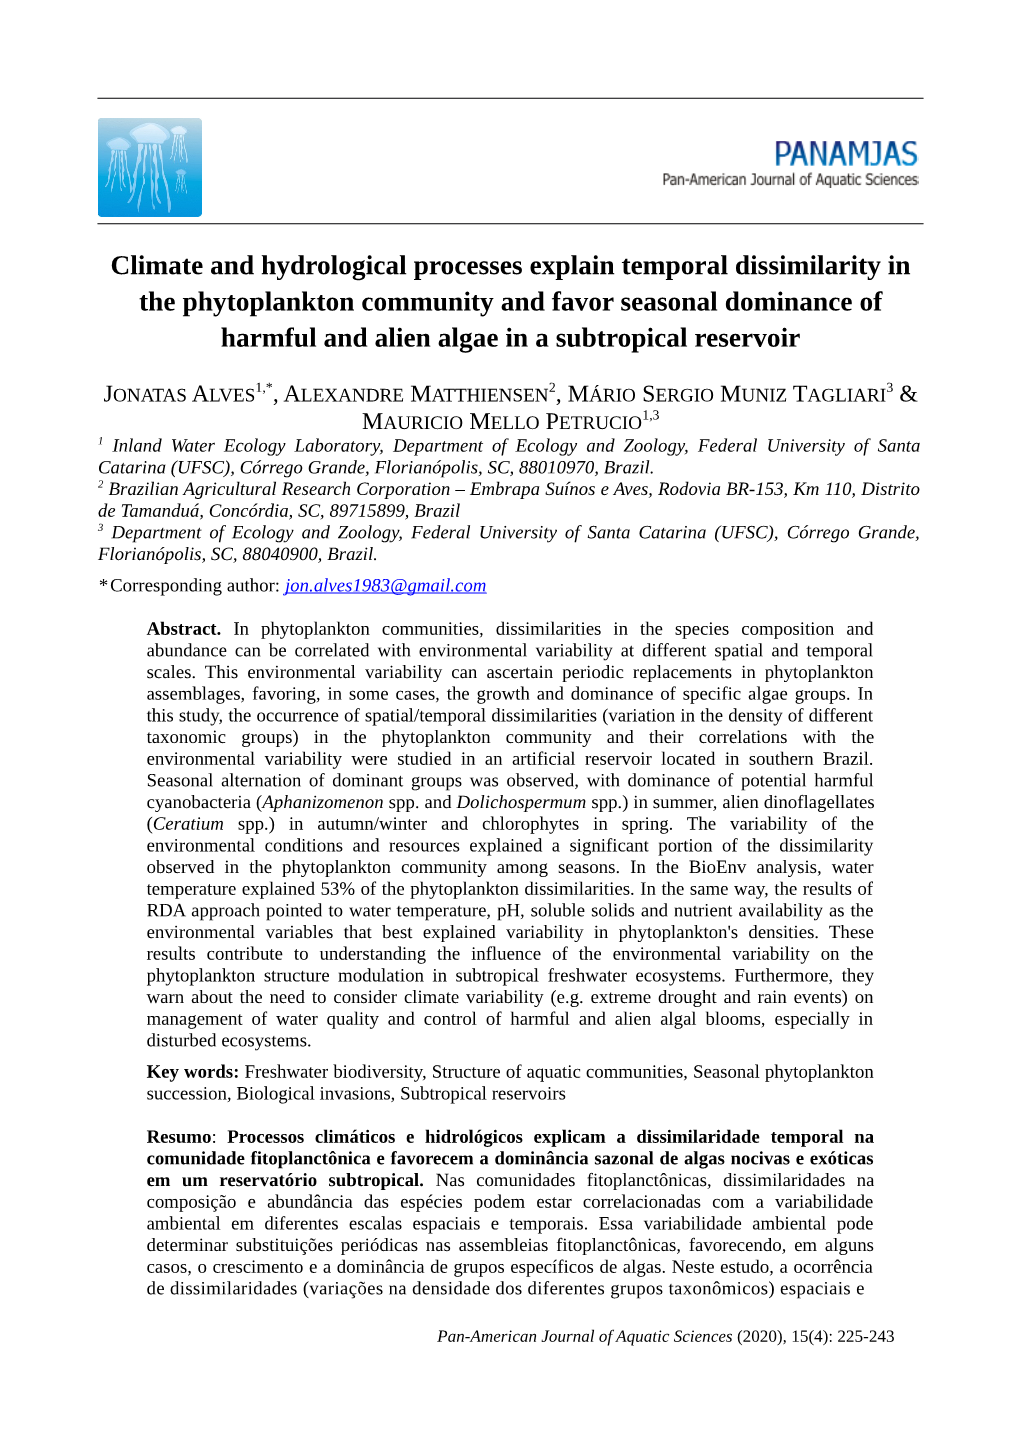 Climate and Hydrological Processes Explain Temporal Dissimilarity in The